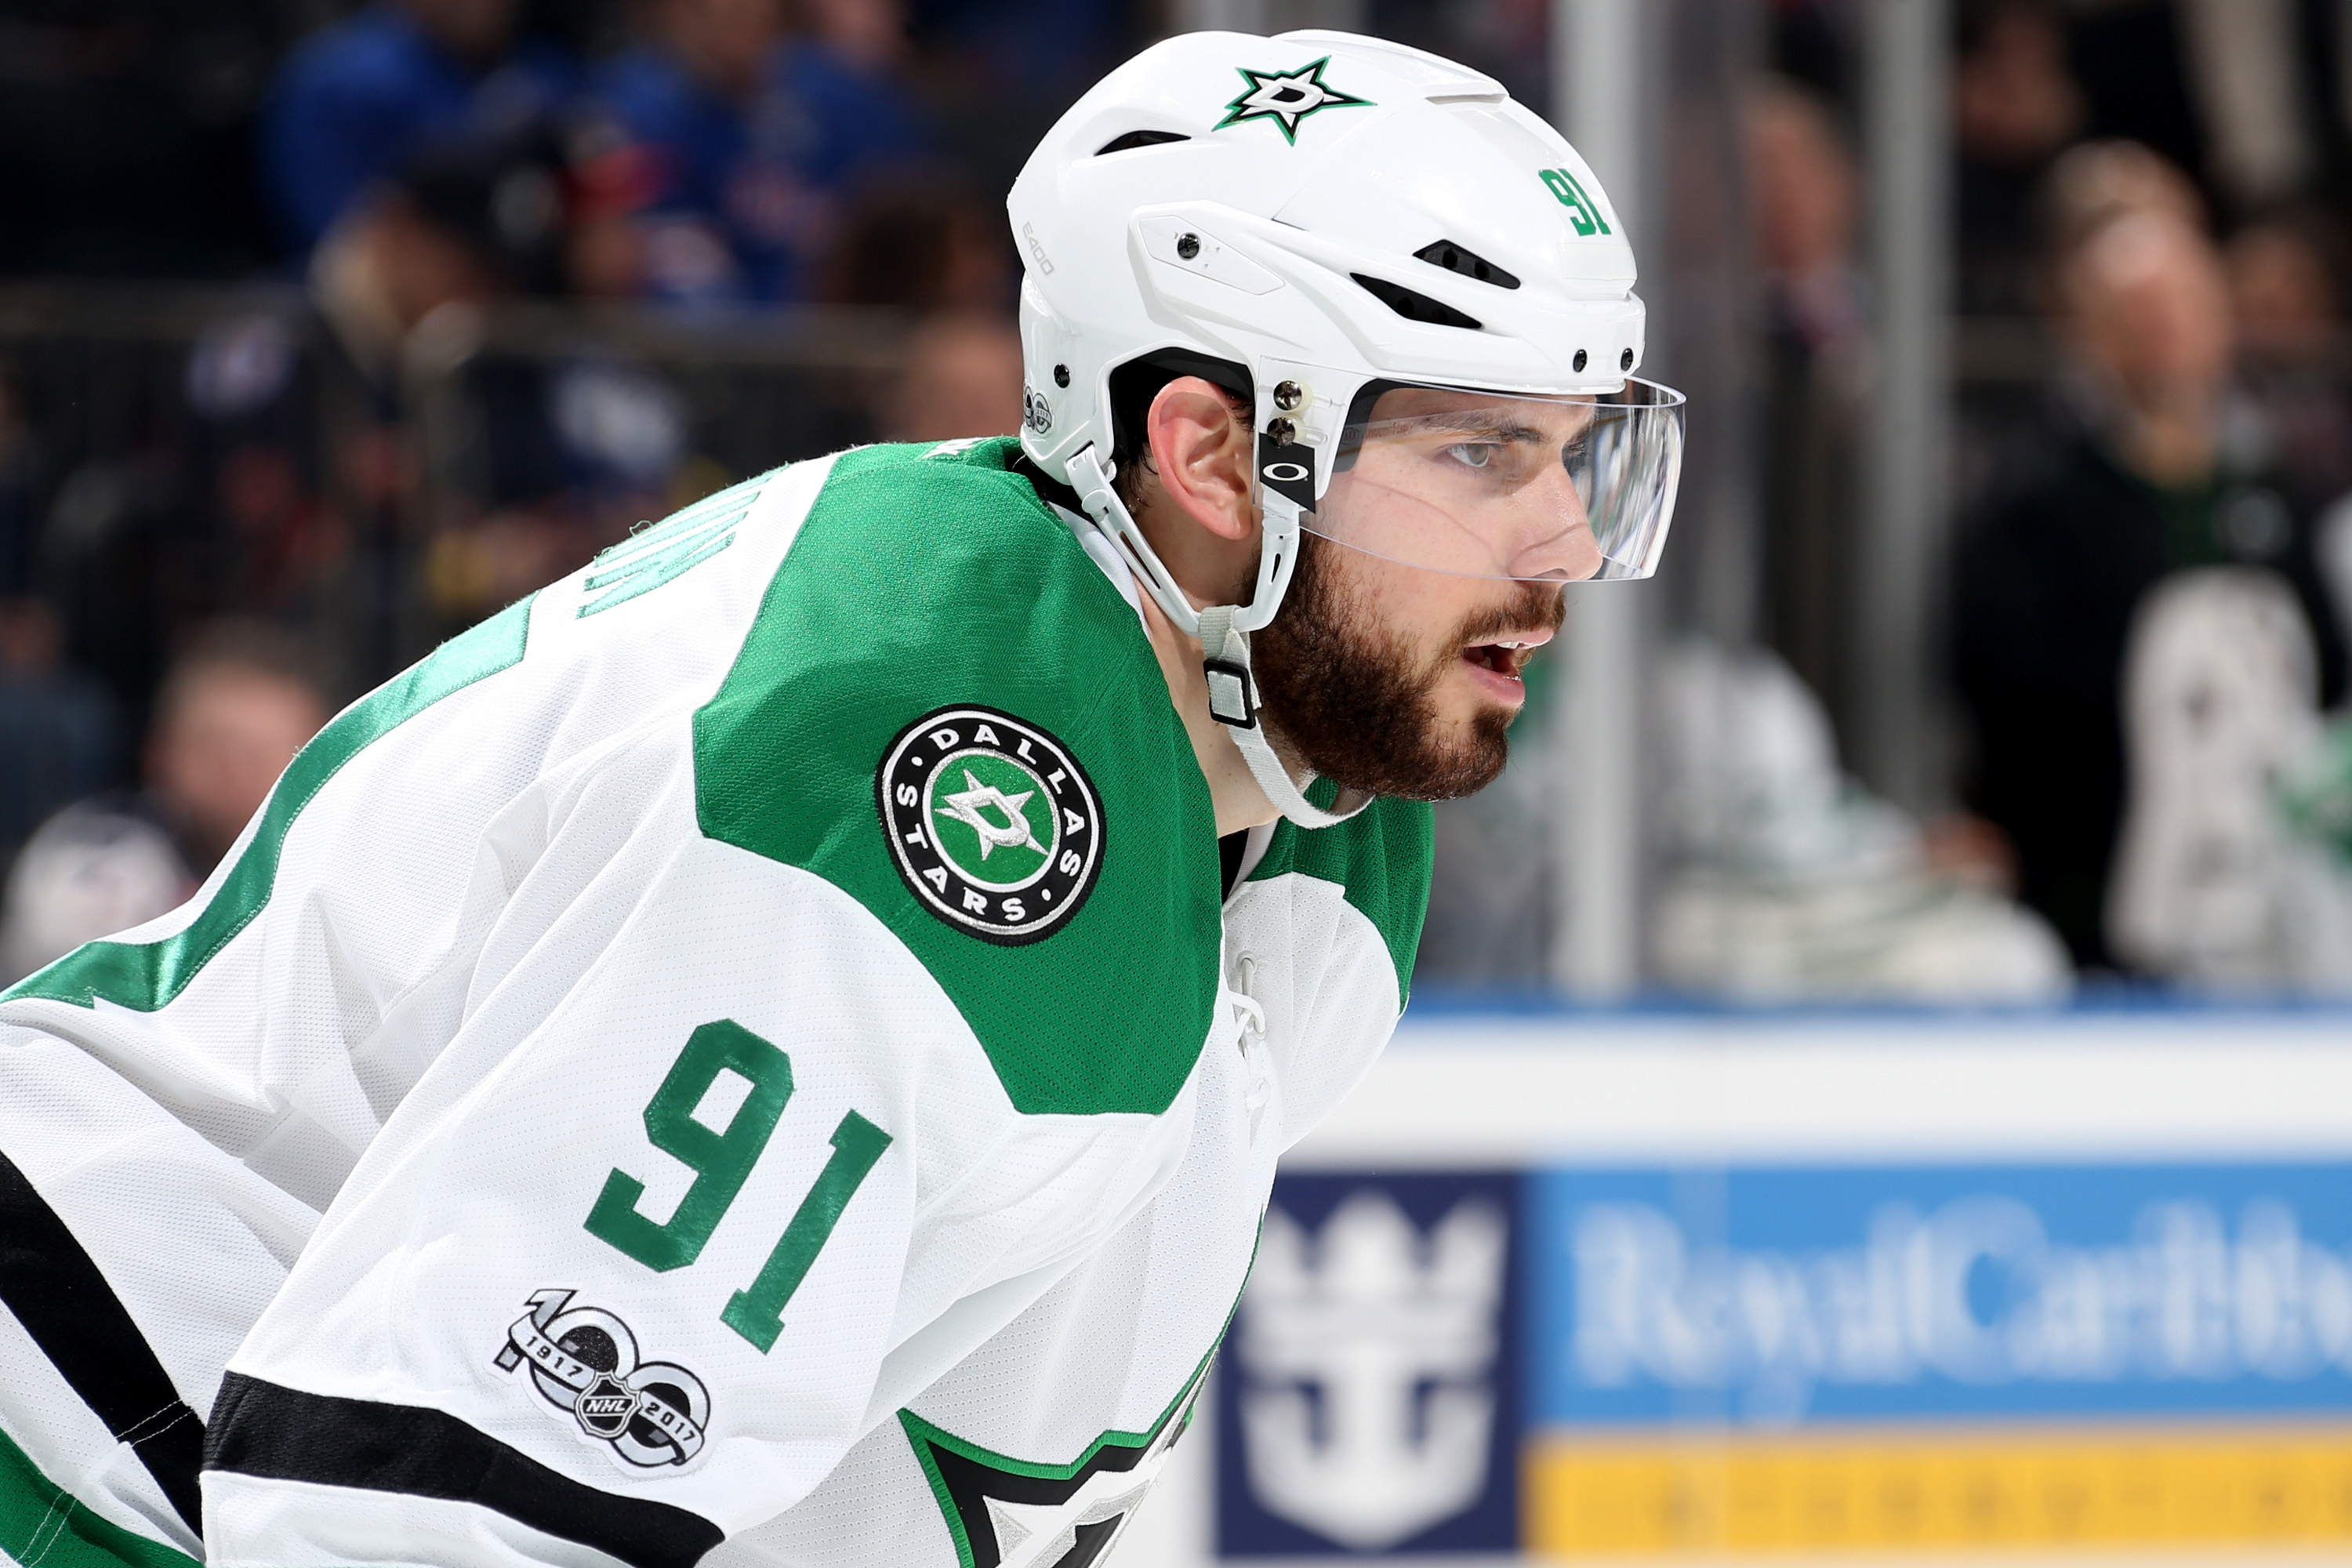 Dallas Stars Projected To Look Extremely Different In 2019-20 Season